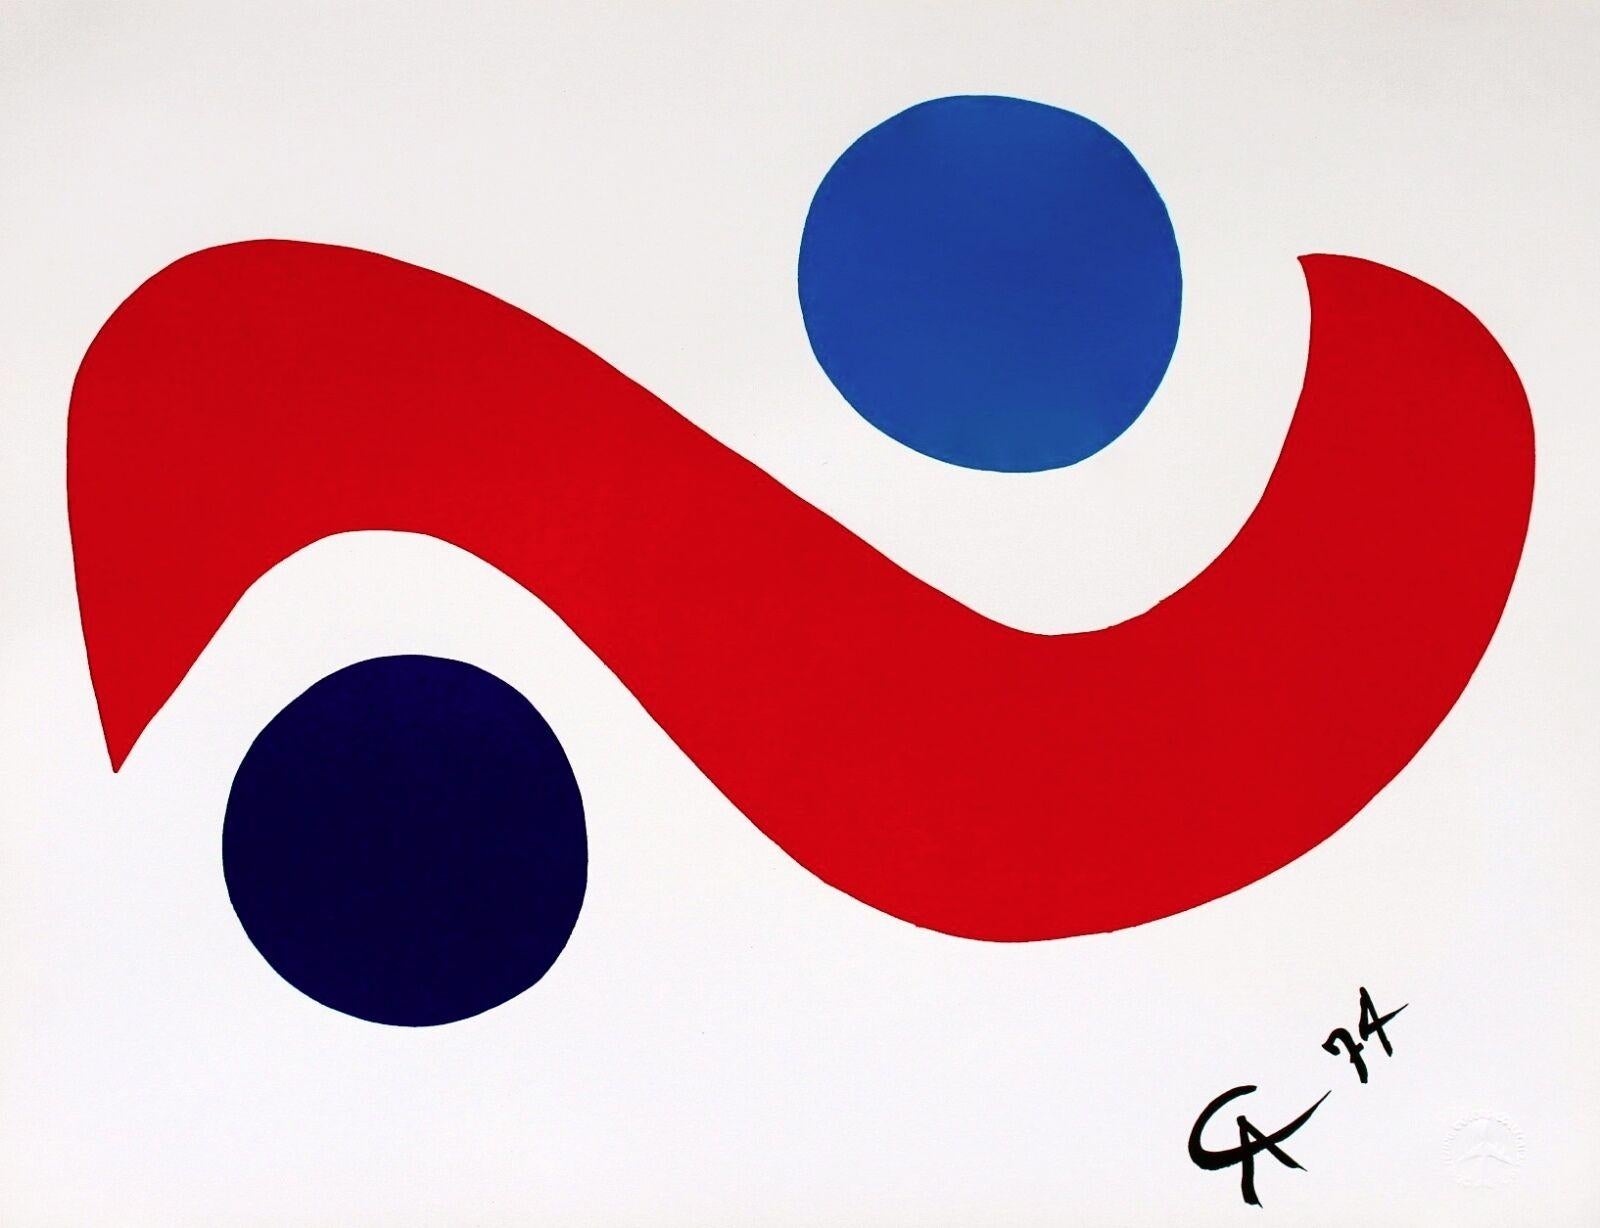 ALEXANDER CALDER (1898-1976) Credited with the invention of the mobile, Alexander Calder revolutionized twentieth-century art with his innovative use of subtle air currents to animate sculpture. Calder was prolific and worked throughout his career